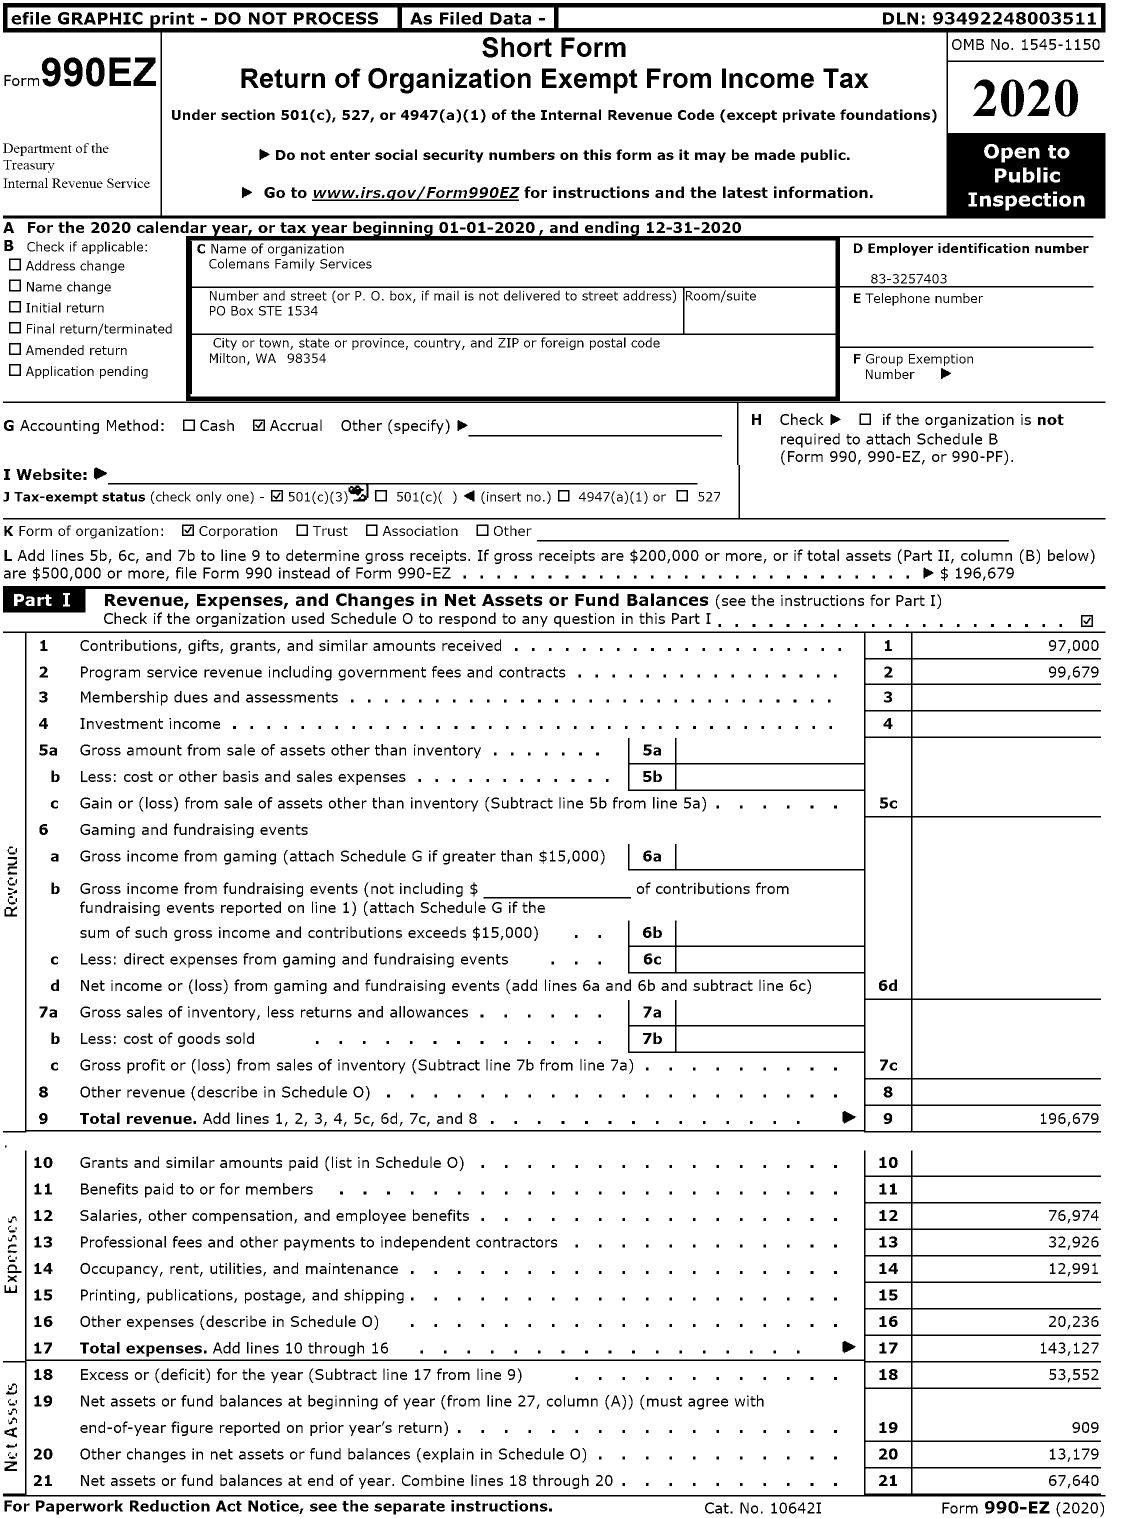 Image of first page of 2020 Form 990EZ for Colemans Family Services